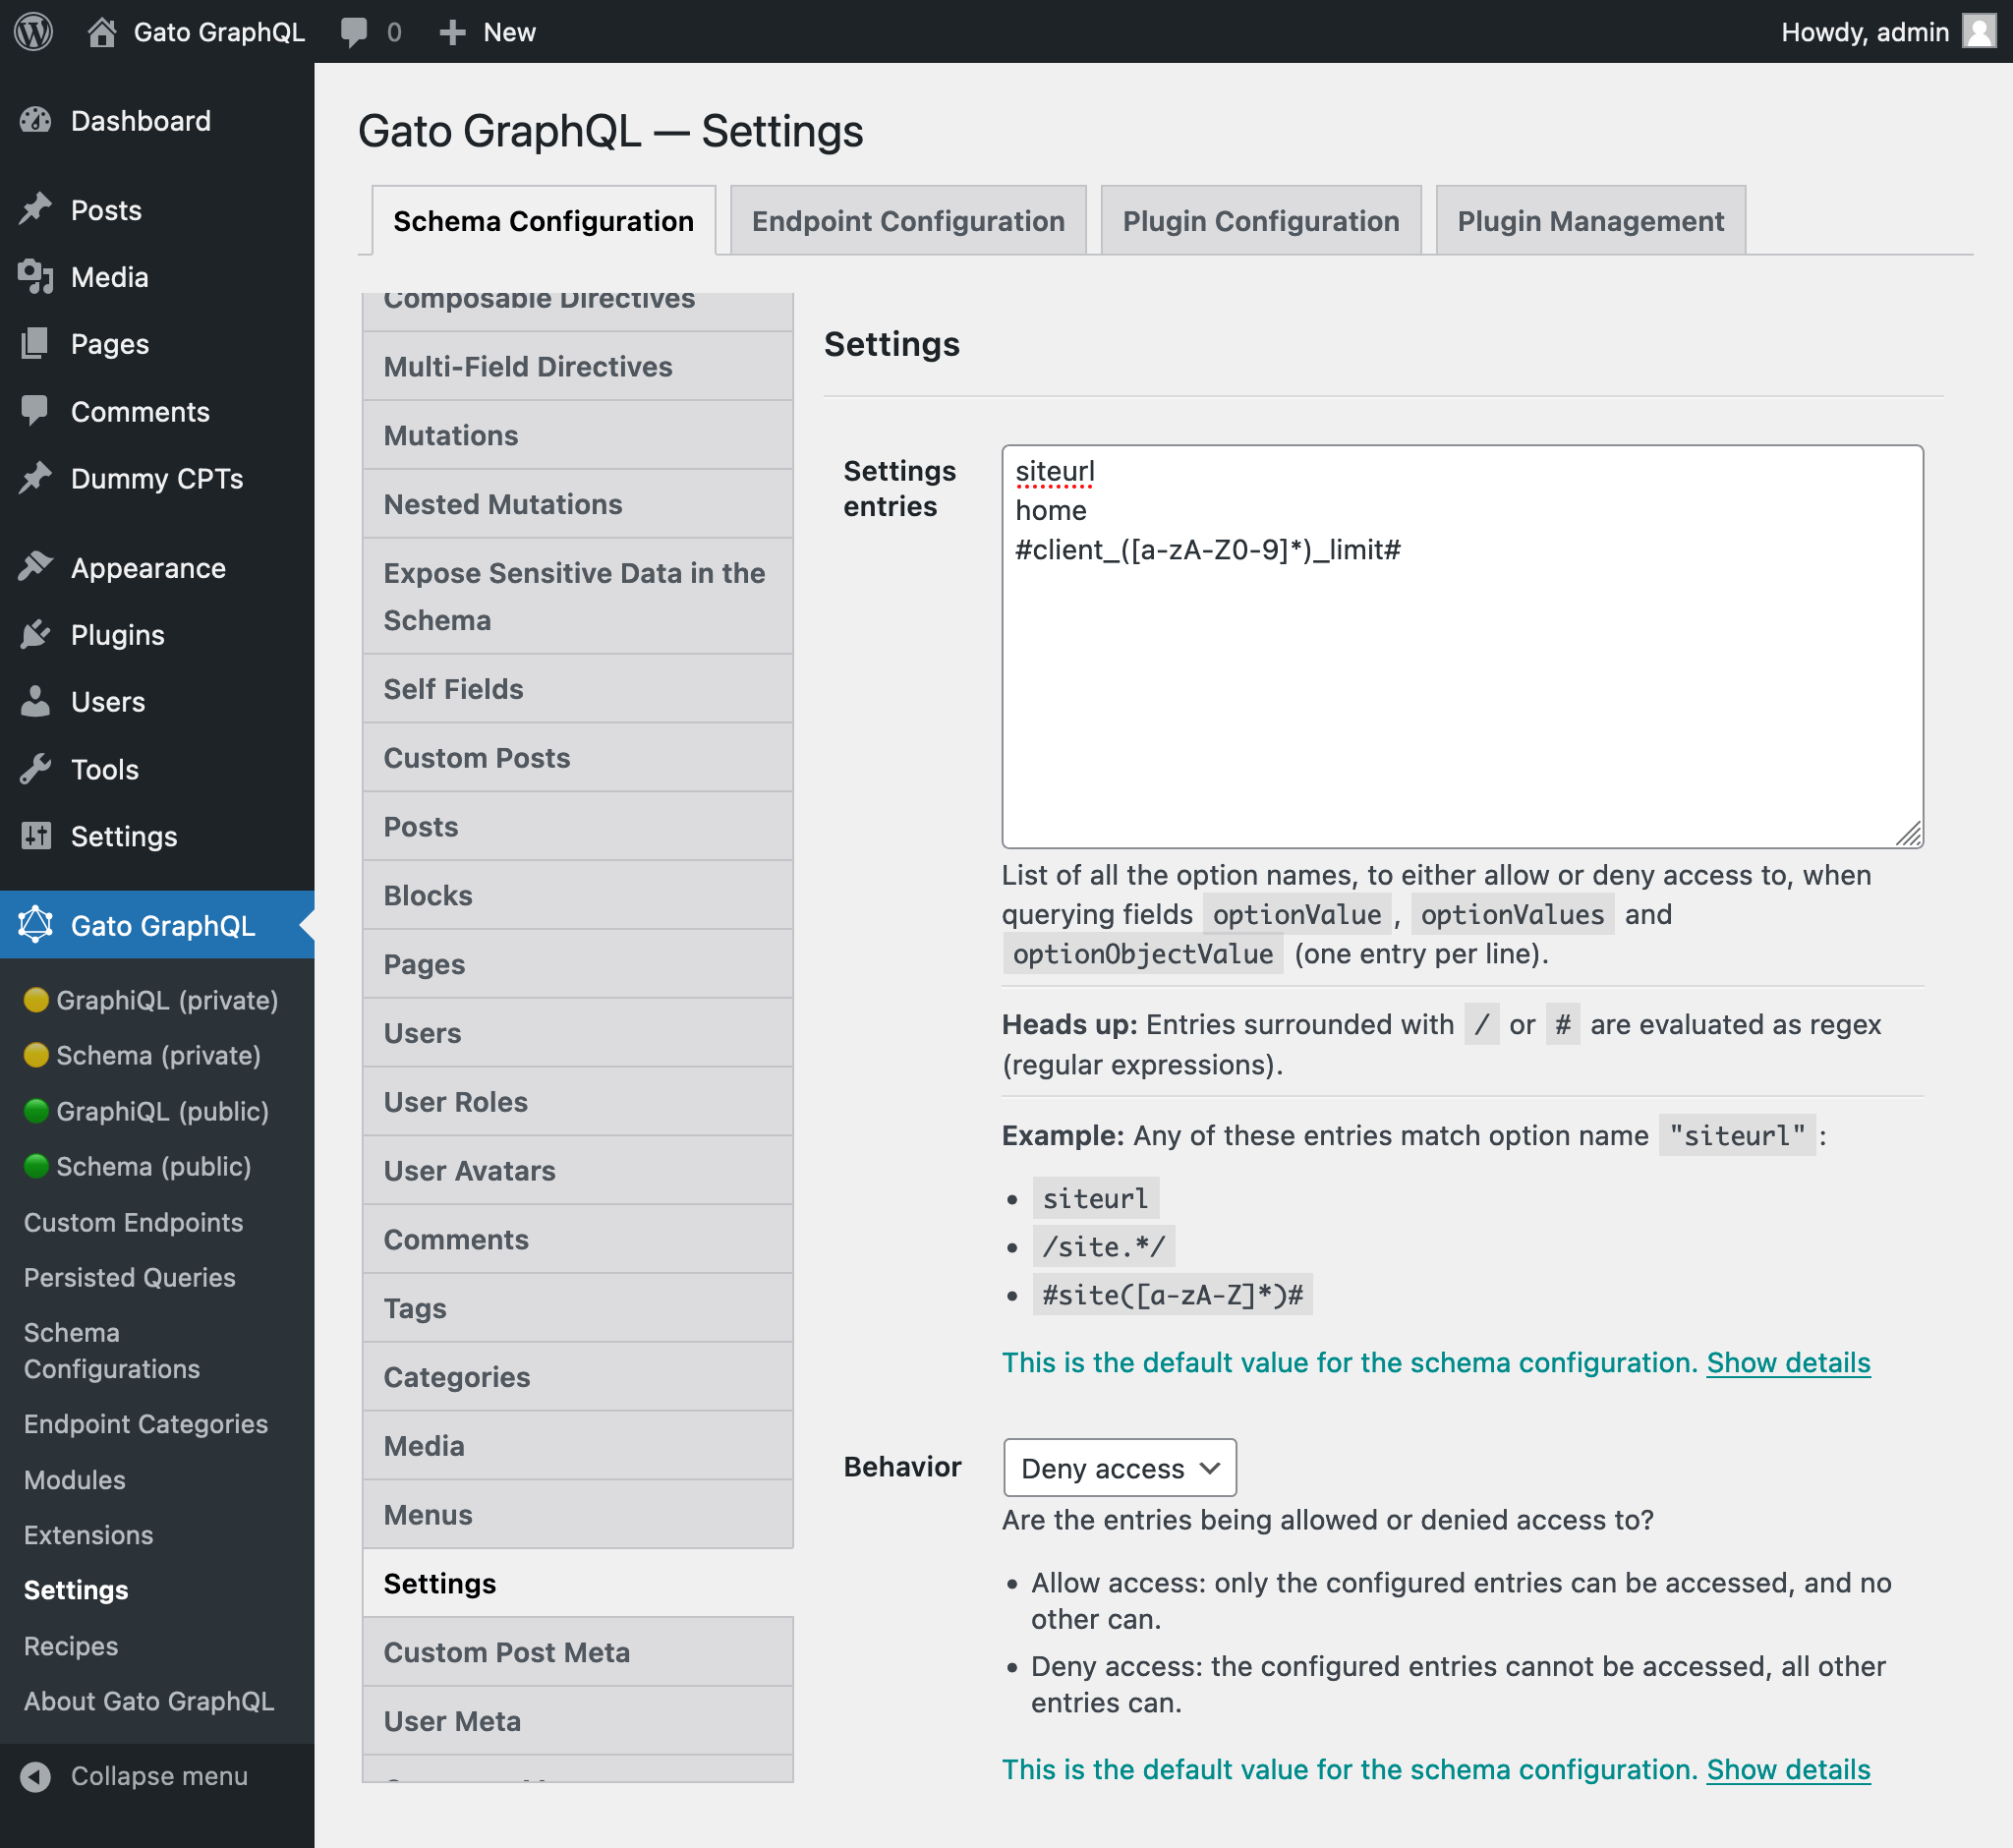 Configure every aspect from the plugin via the Settings page